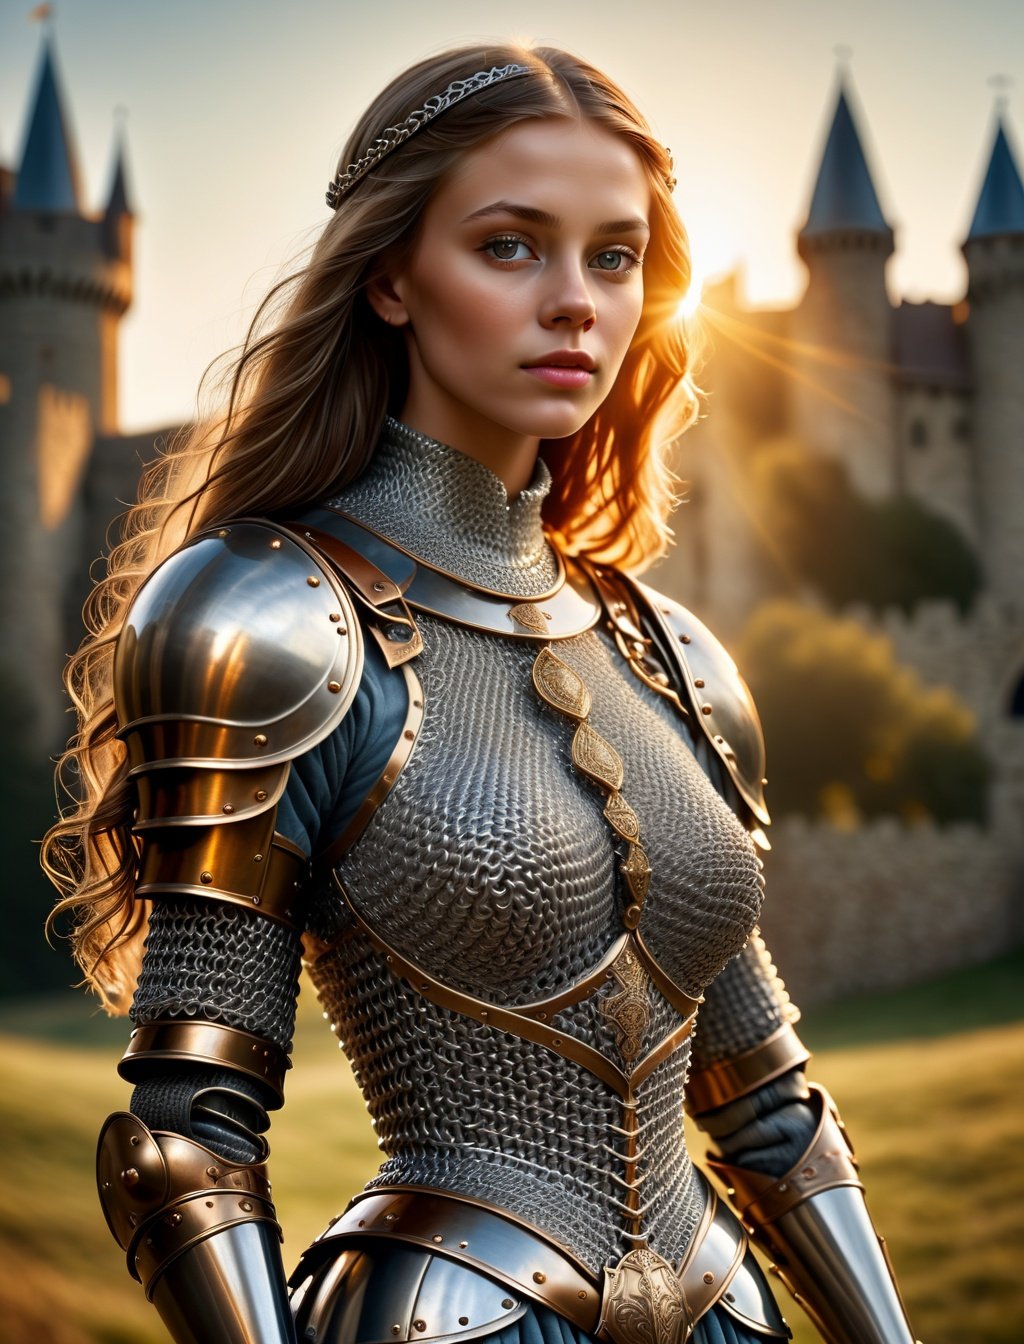 (masterpiece), (extremely intricate), (realistic), portrait of a girl, the most beautiful in the world, (medieval armor), metal reflections, upper body, outdoors, intense sunlight, far away castle, professional photograph of a stunning woman detailed, sharp focus, dramatic, award winning, cinematic lighting, , volumetrics dtx, (film grain, blurry background, blurry foreground, bokeh, depth of field, sunset,interaction, Perfect chainmail)  <lora:wowifierXL:0.6>